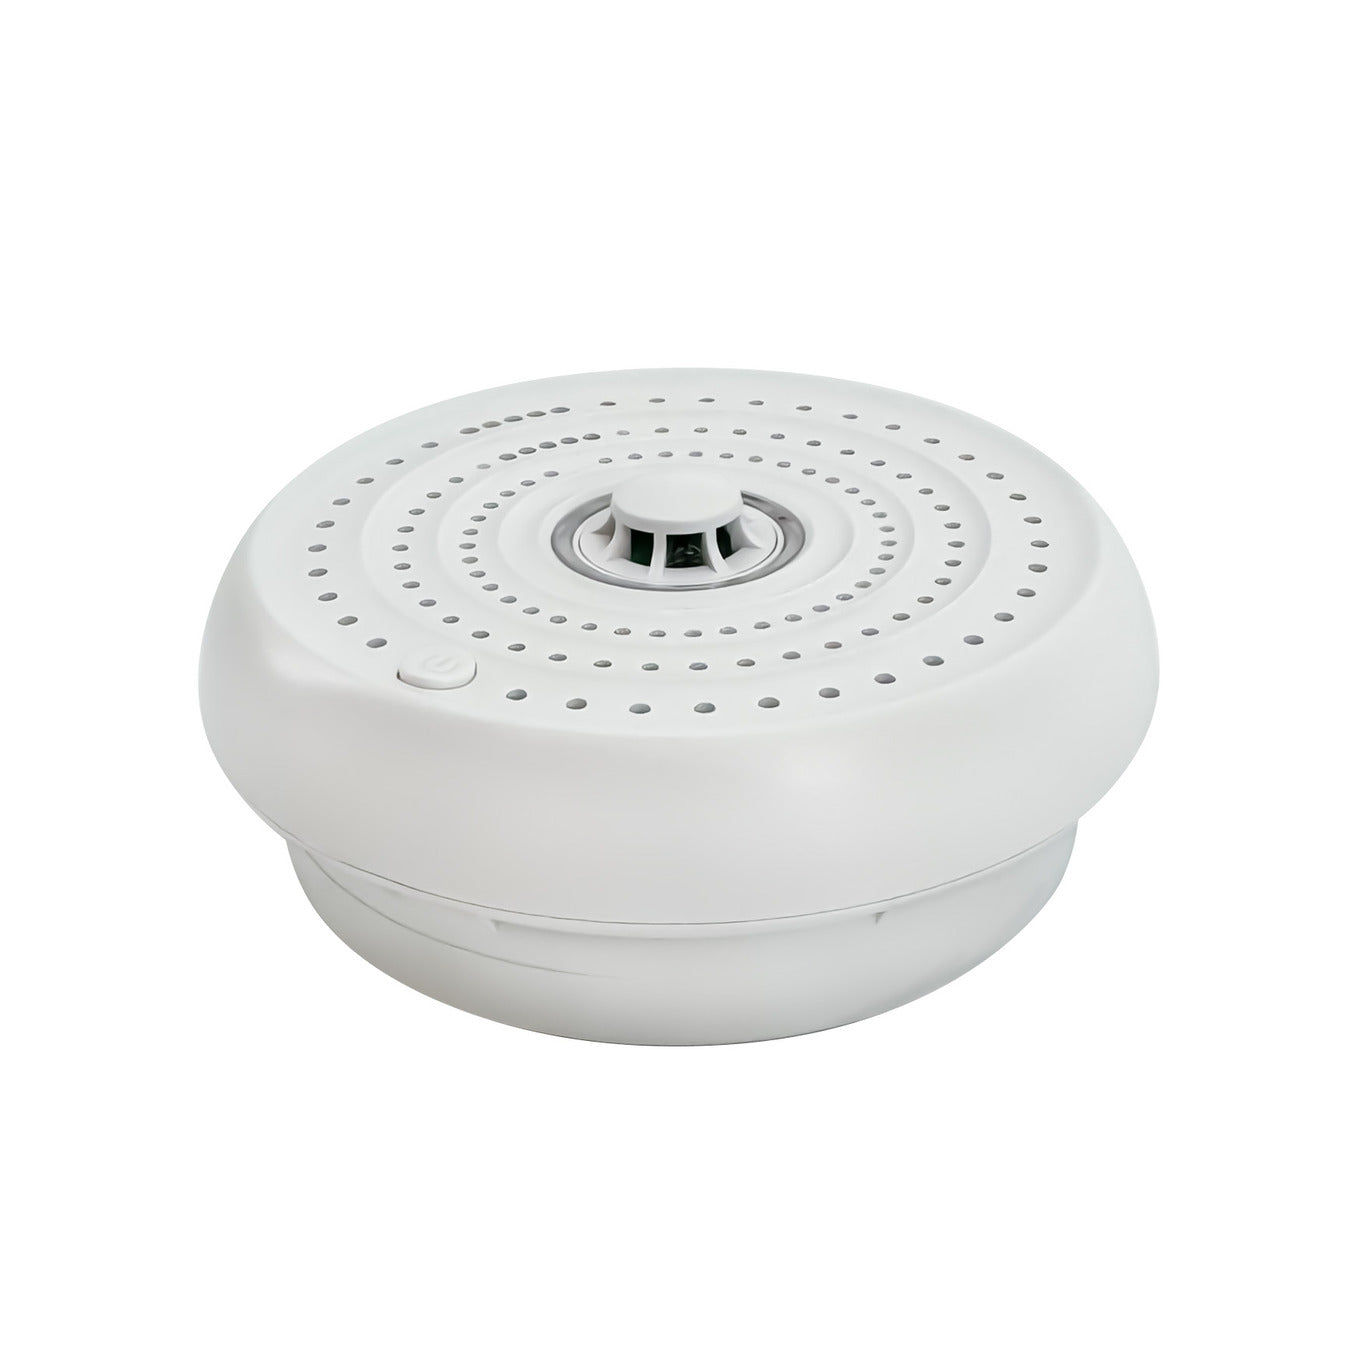 Firexo Interlinked Heat Alarm with 10 Year Tamper Proof Battery, can be interlinked with Firexo Carbon Monoxide Alarm and Firexo Smoke Alarm (sold separately), White